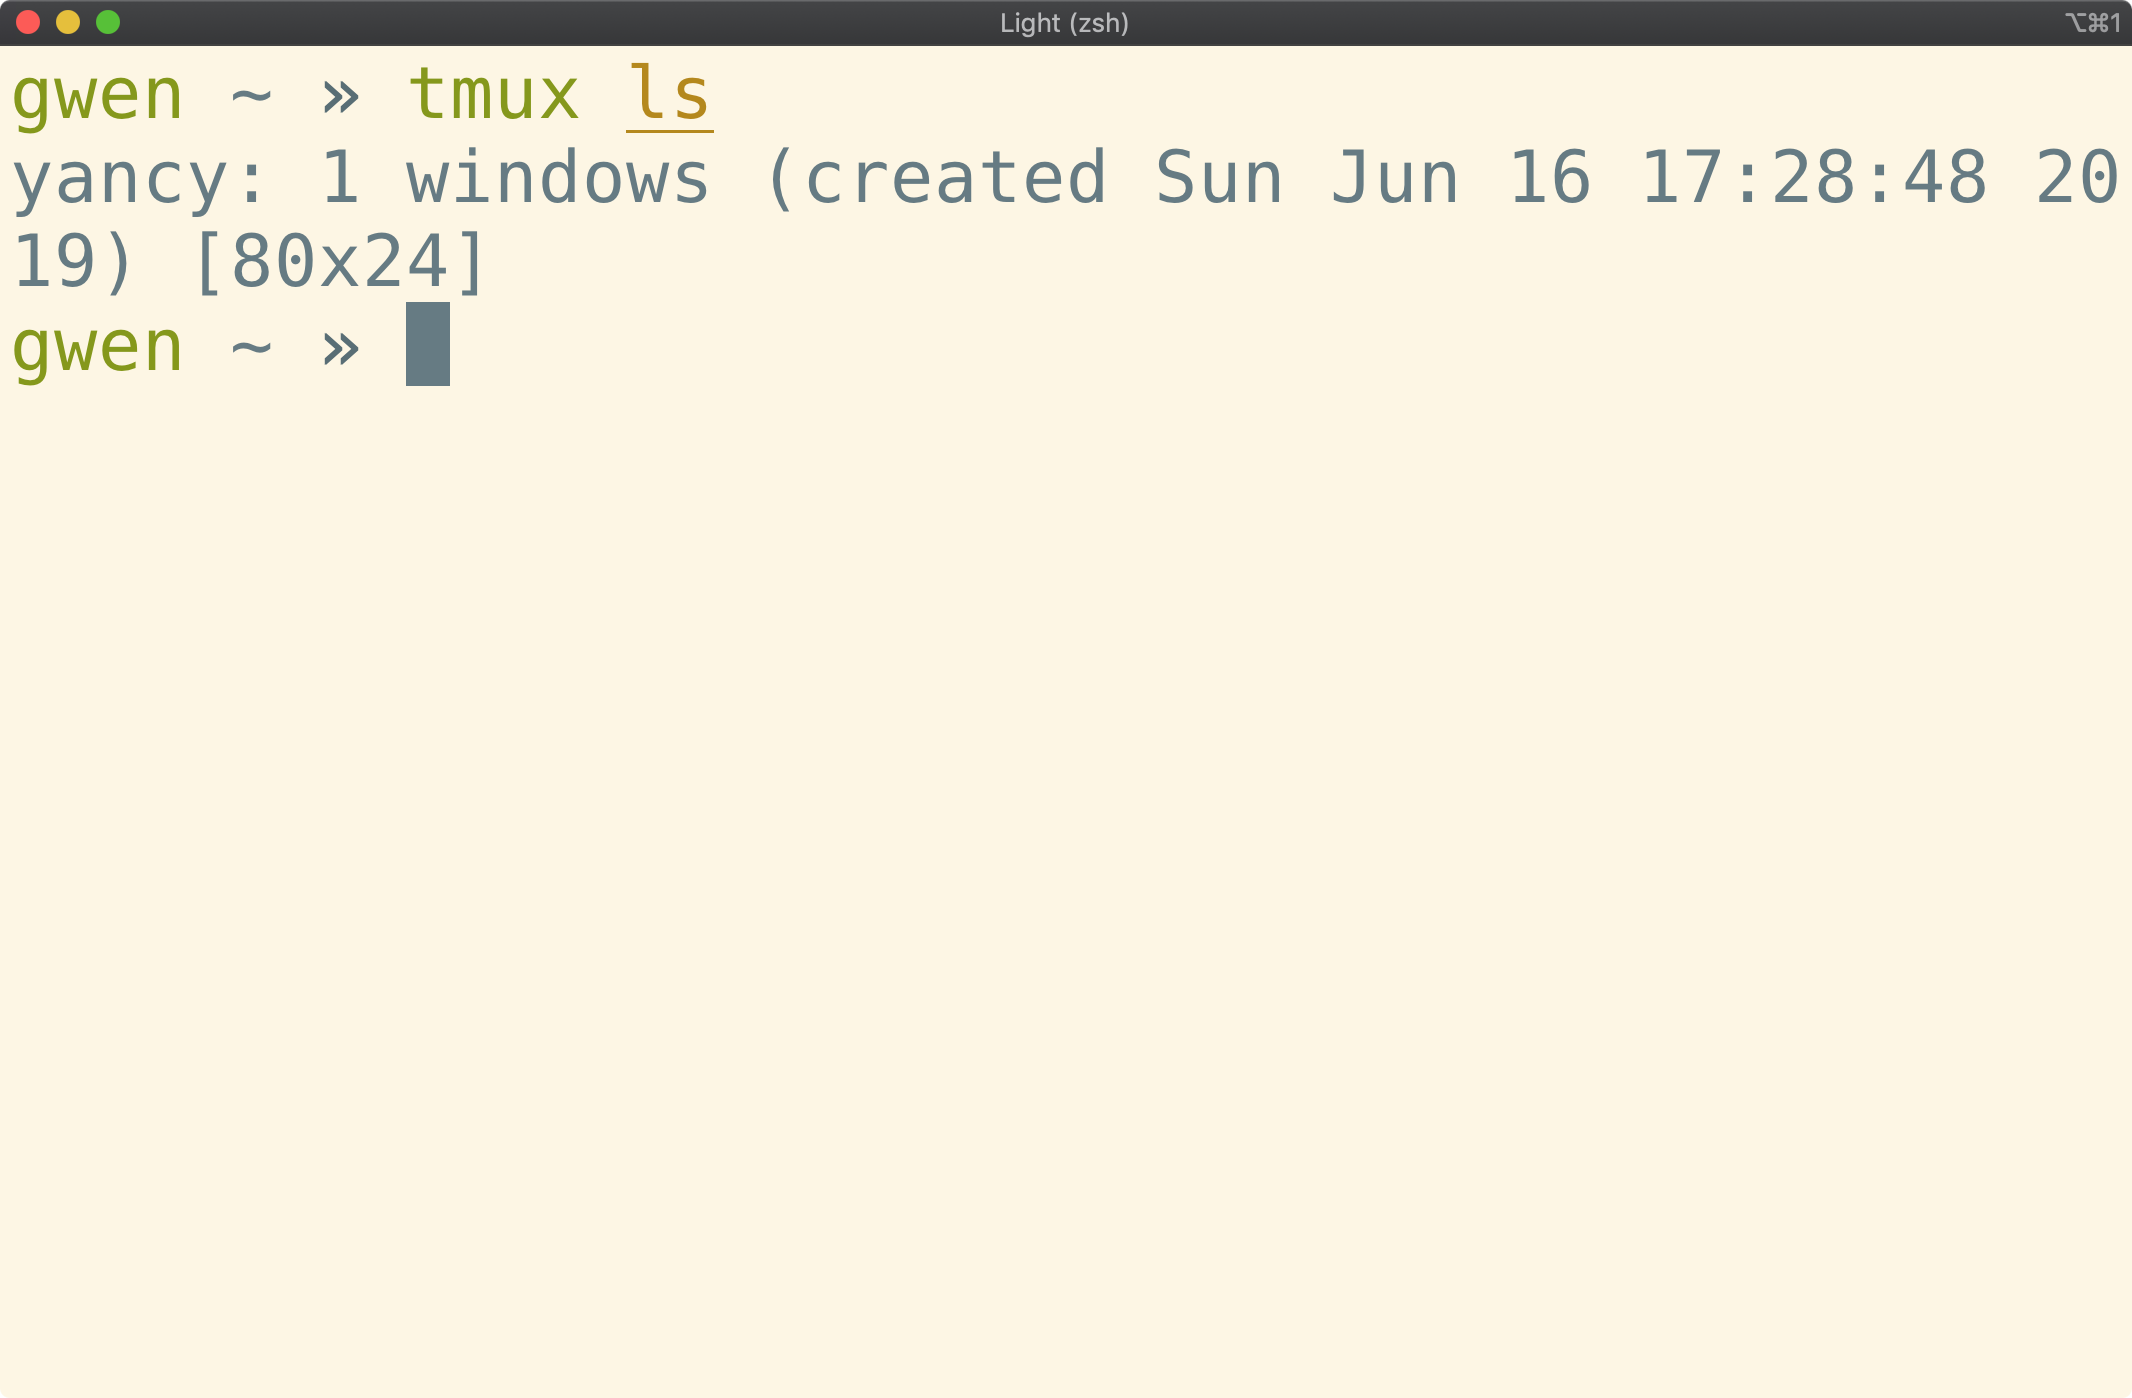 Shell window with "tmux ls" command executed"